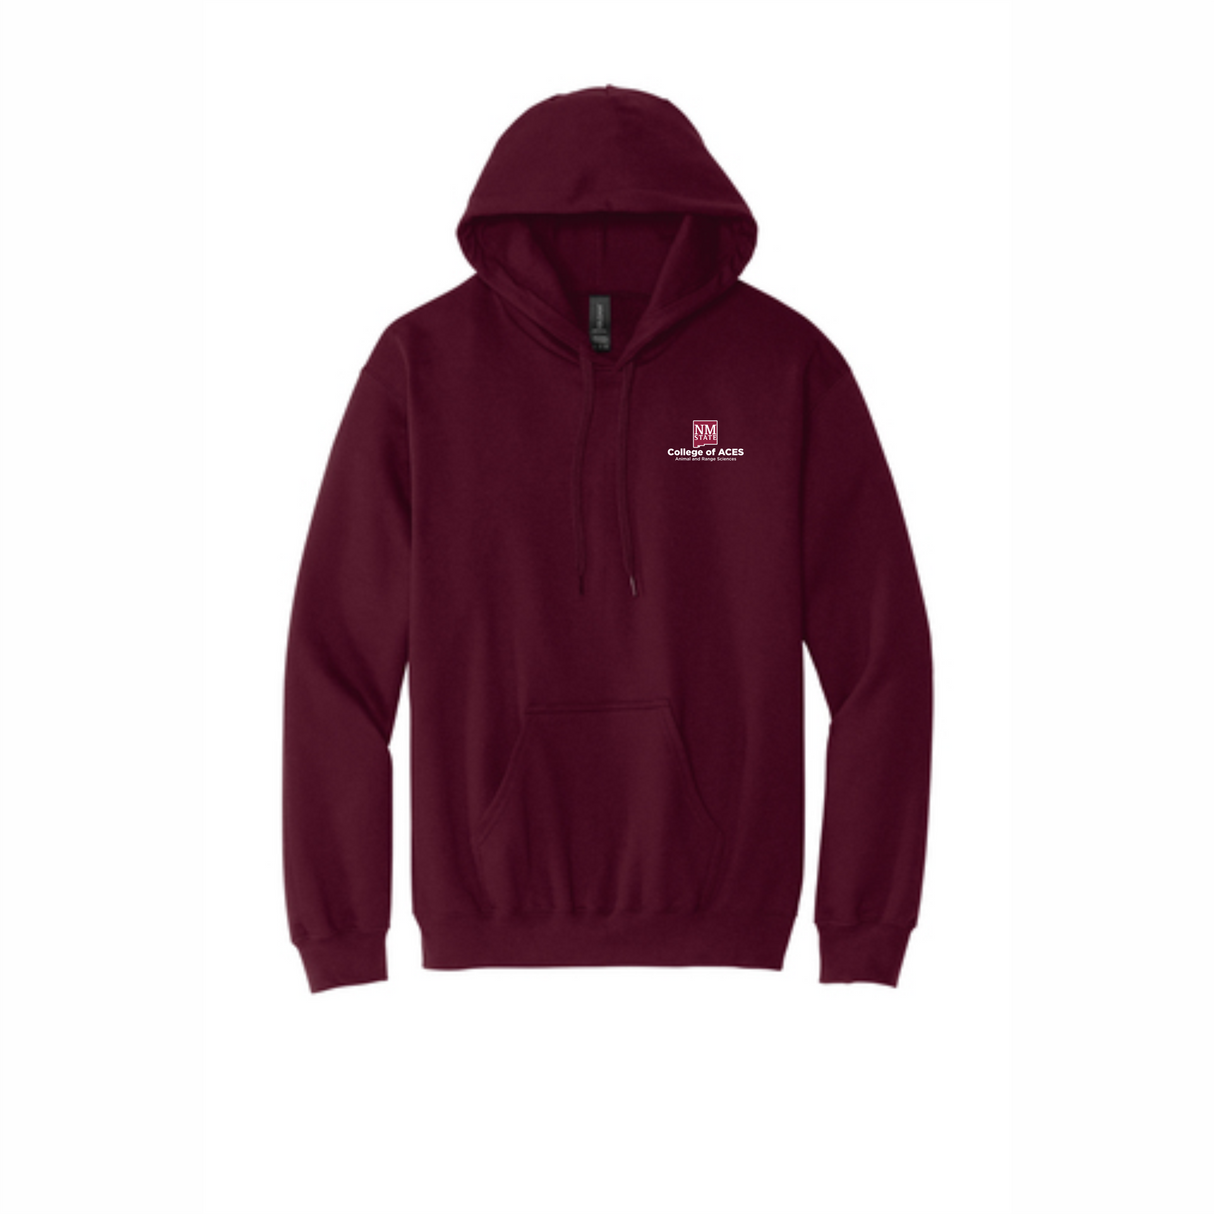 NMSU ANRS Pullover Hoodie